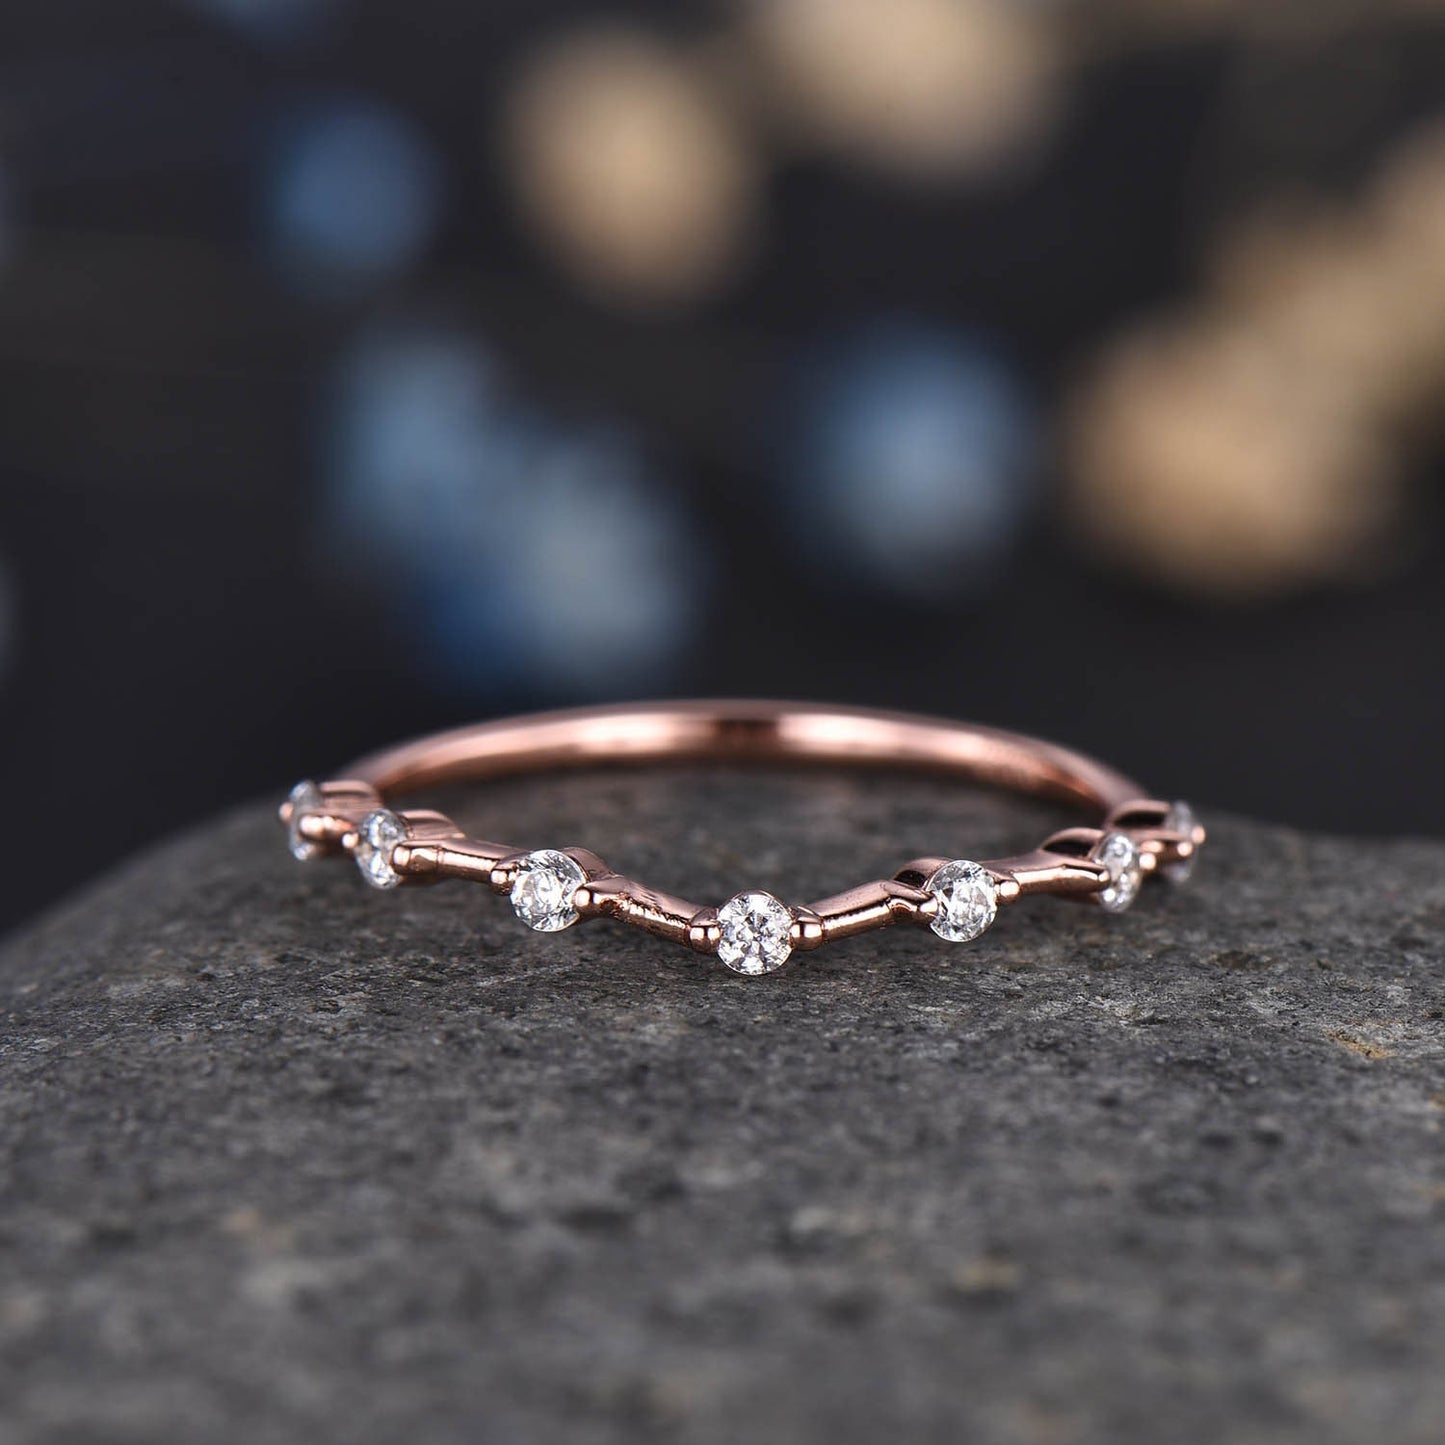 Dainty Diamond Wedding Band Rose Gold Curved Wedding Ring Stacking Matching Band For Women Genuine Diamond Anniversary Gift For Her